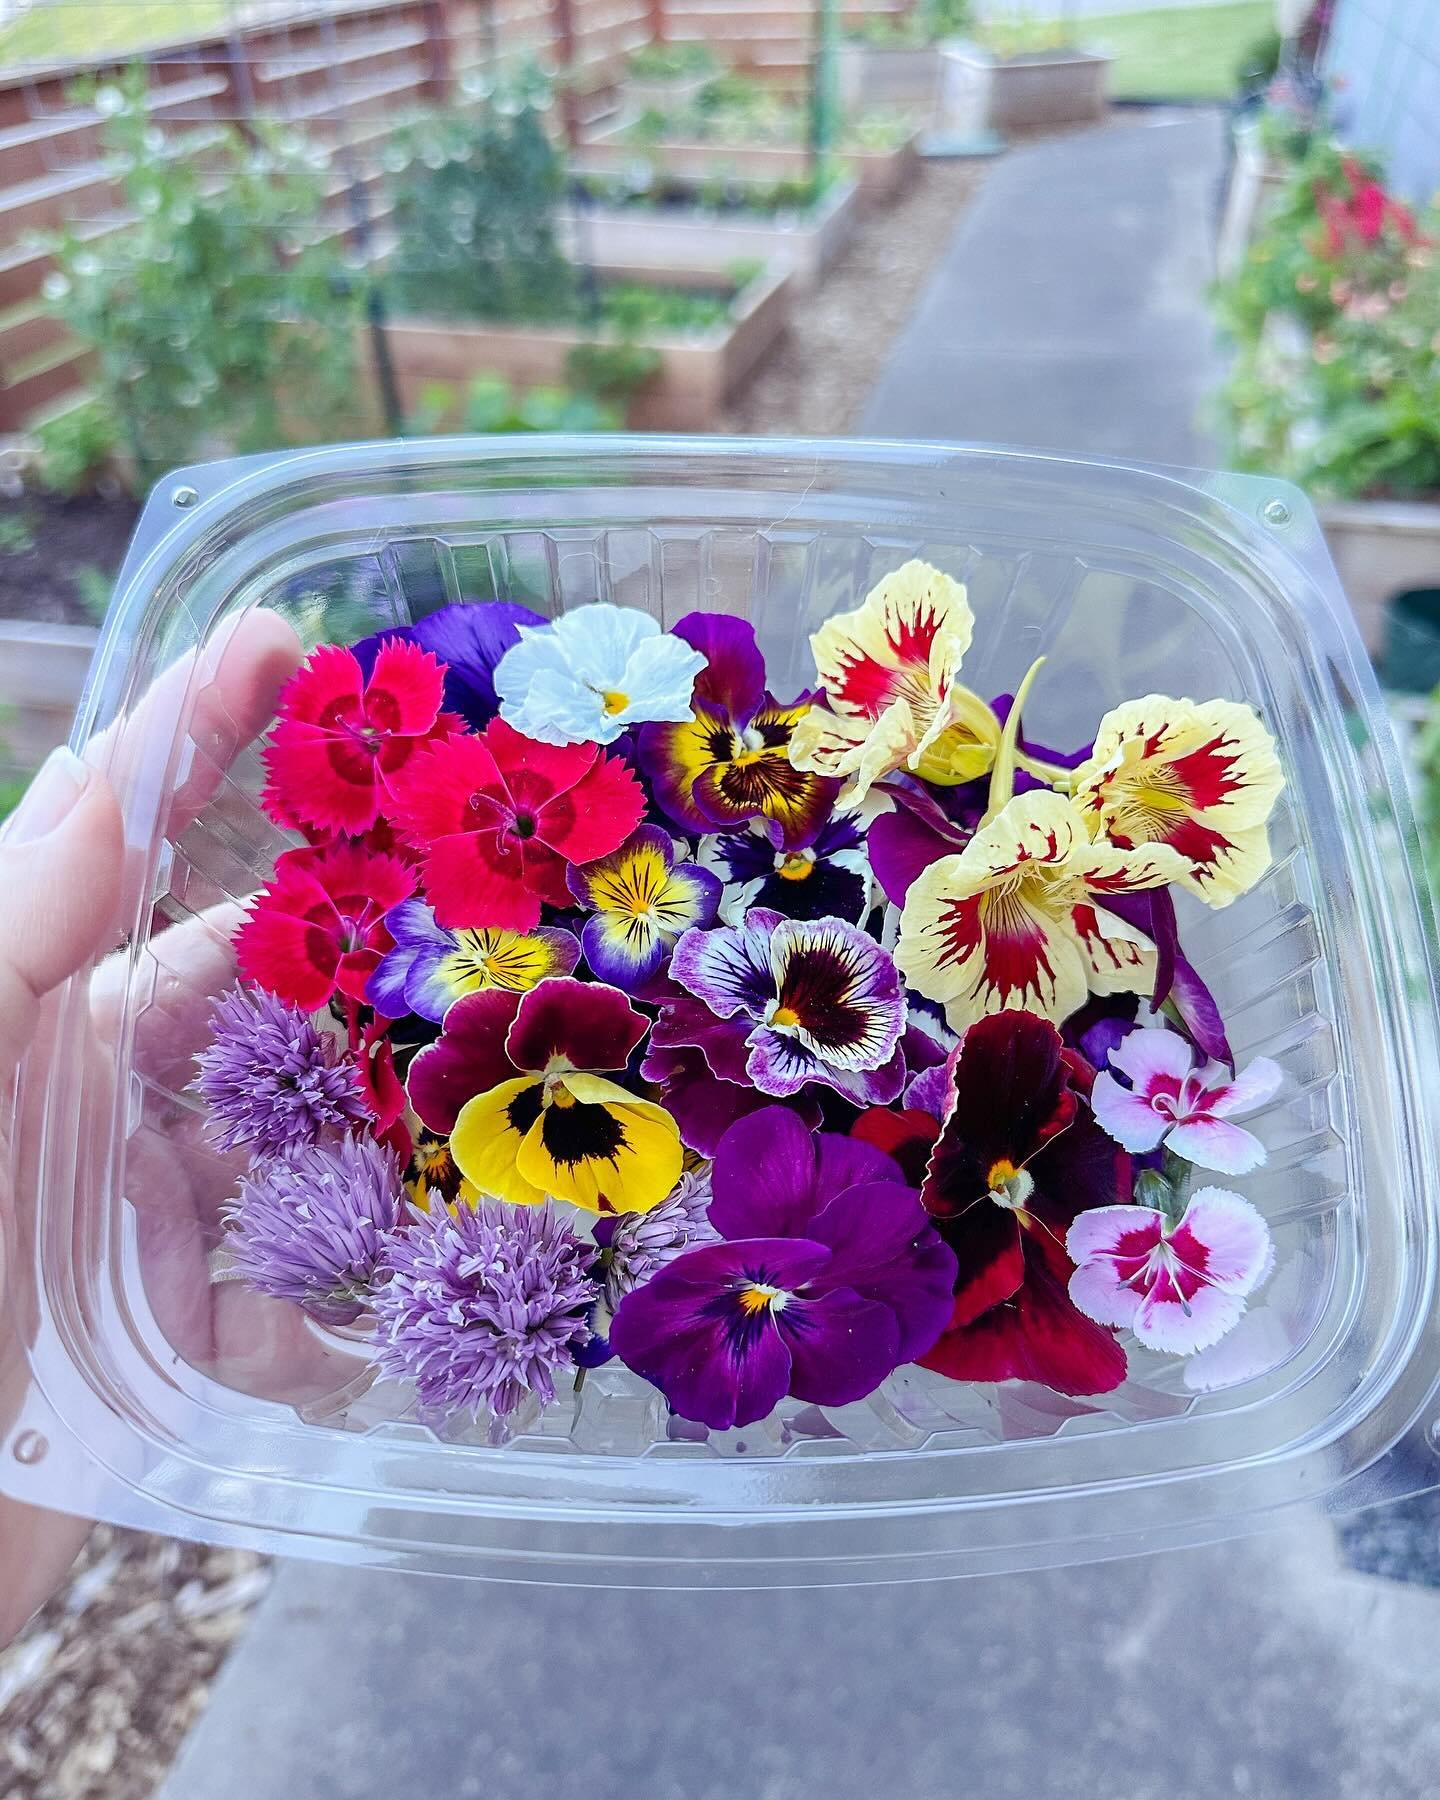 The seasons are shifting and the cool weather edible flowers are winding down as the warm season blooms emerge! 🌺

Our edible flower offerings have been wildly popular this year - thank you to everyone who has embraced these beautiful edibles. We&rs